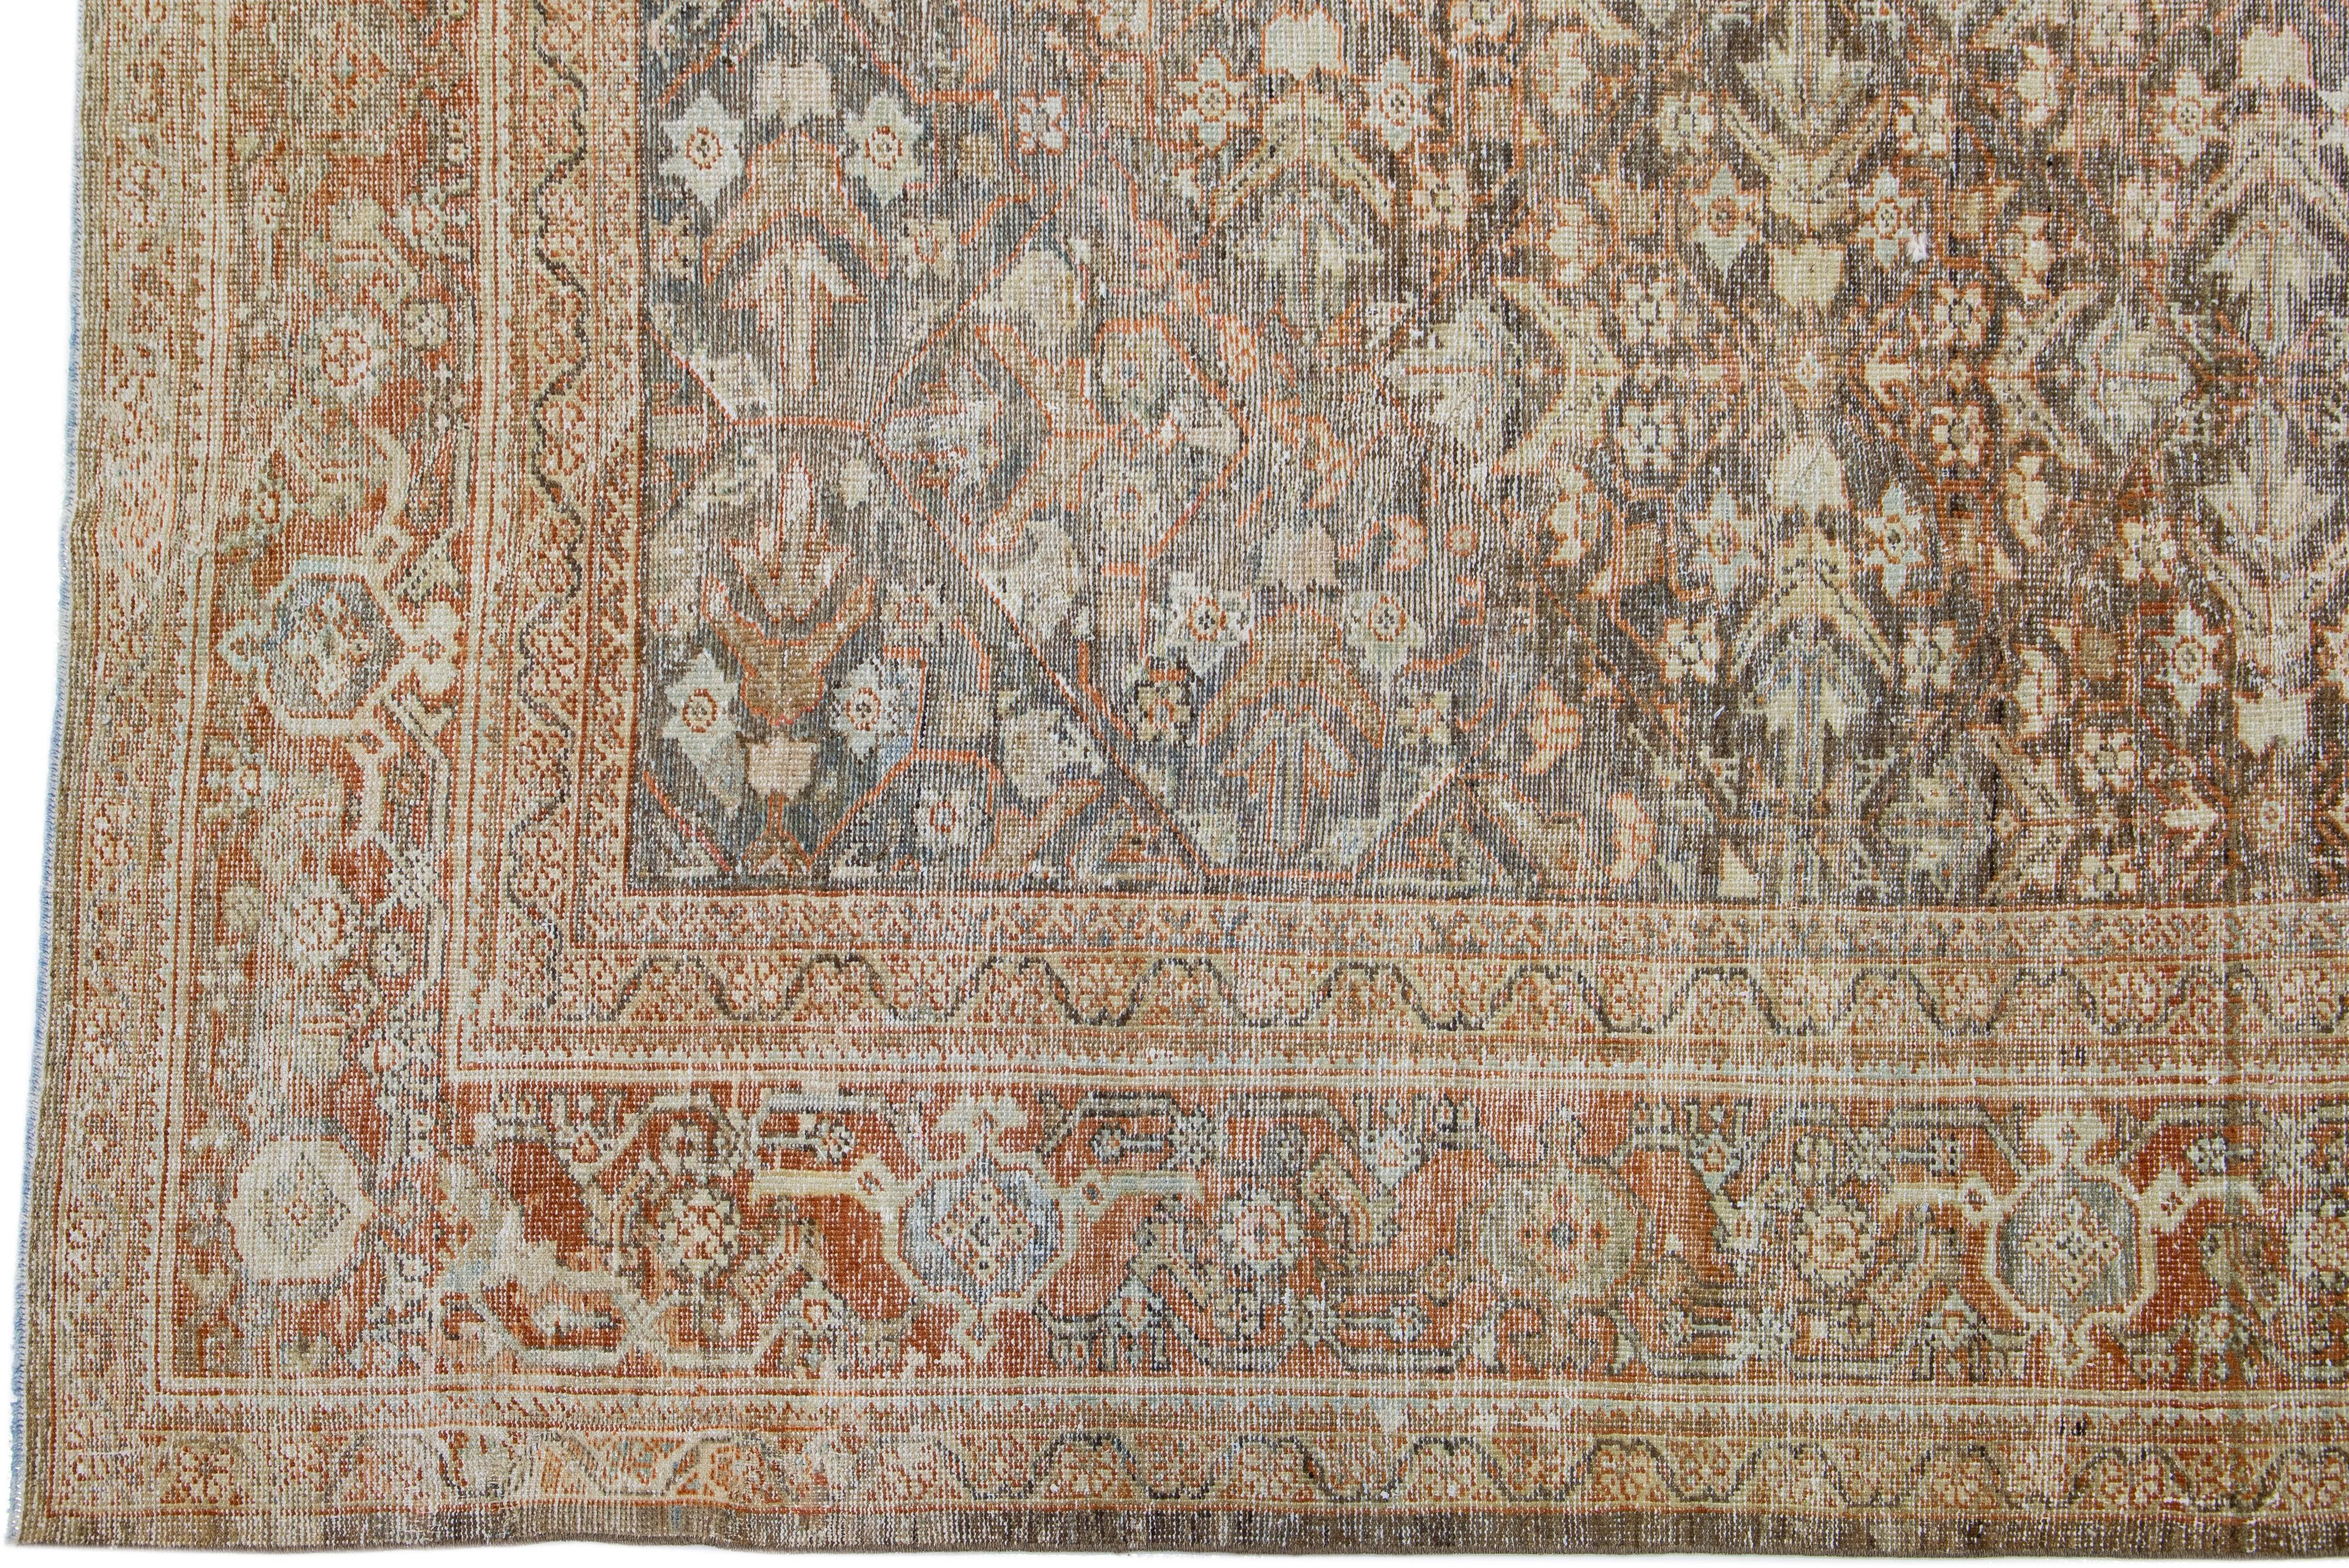 Ovesize 1900s Persian Mahal Allover Wool Rug In Gray & Rust Color In Good Condition For Sale In Norwalk, CT